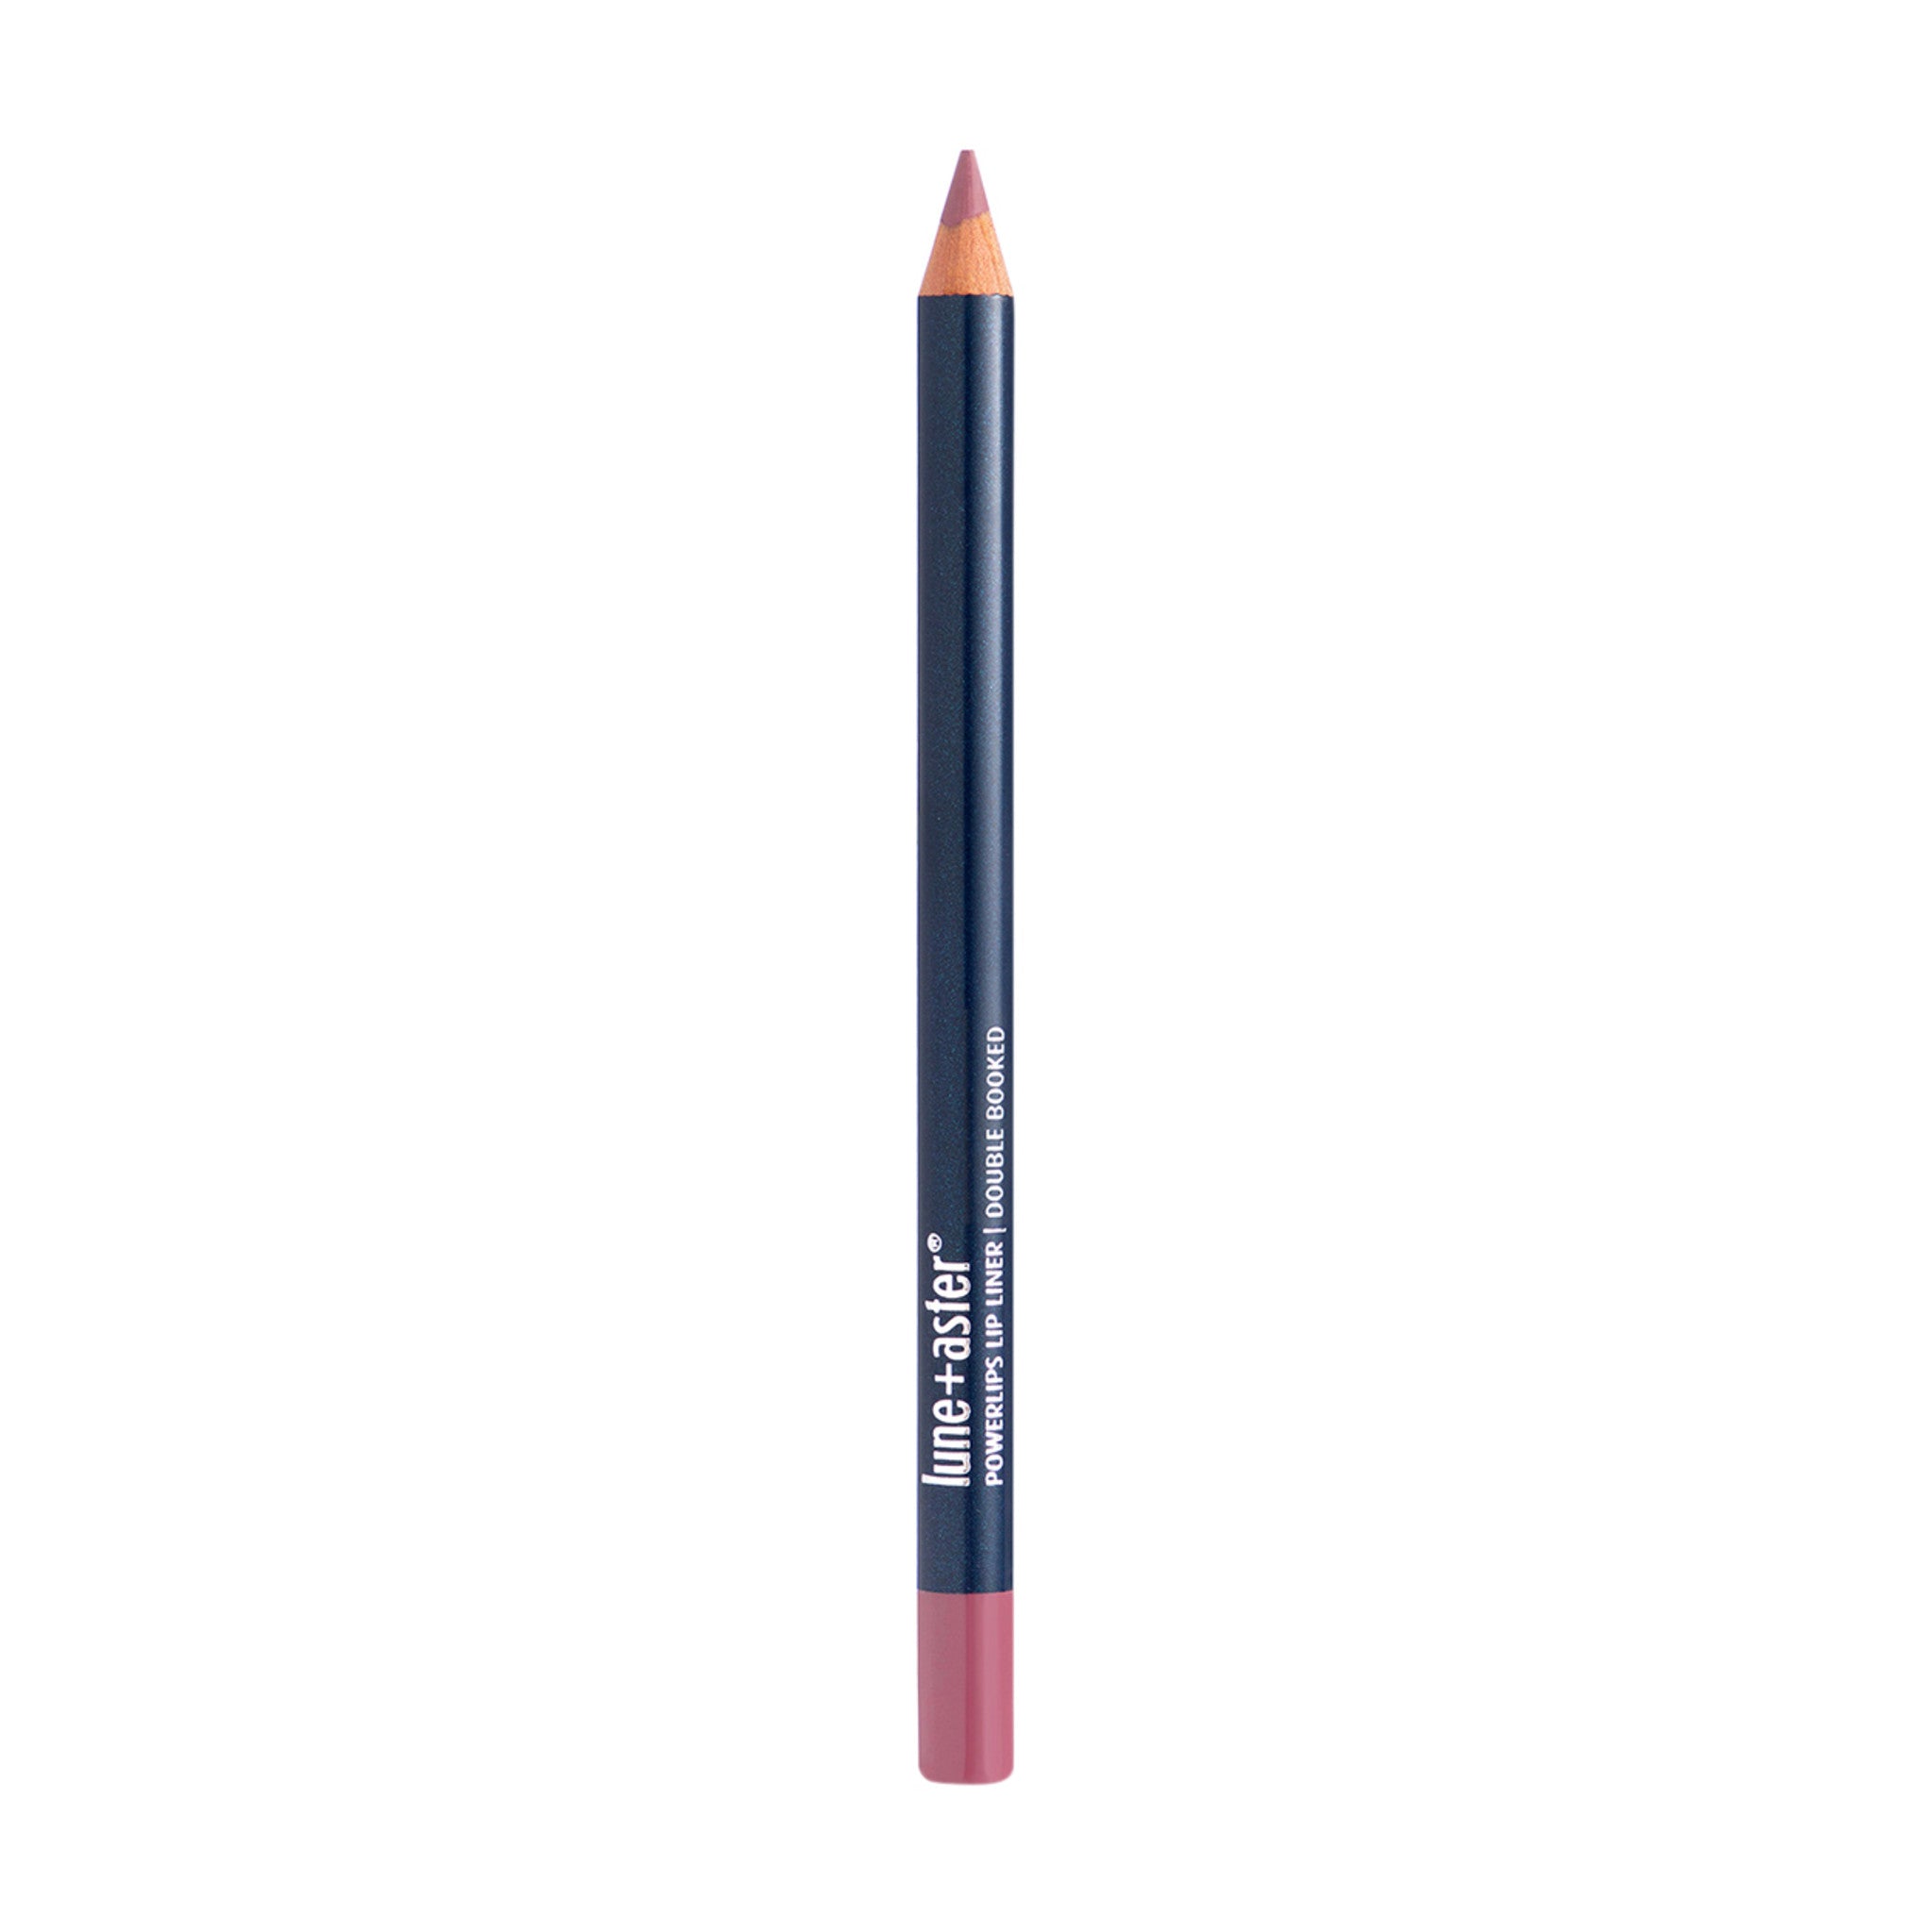 Lune+Aster PowerLips Lip Liner Color/Shade variant: Double Booked main image. This product is in the color nude